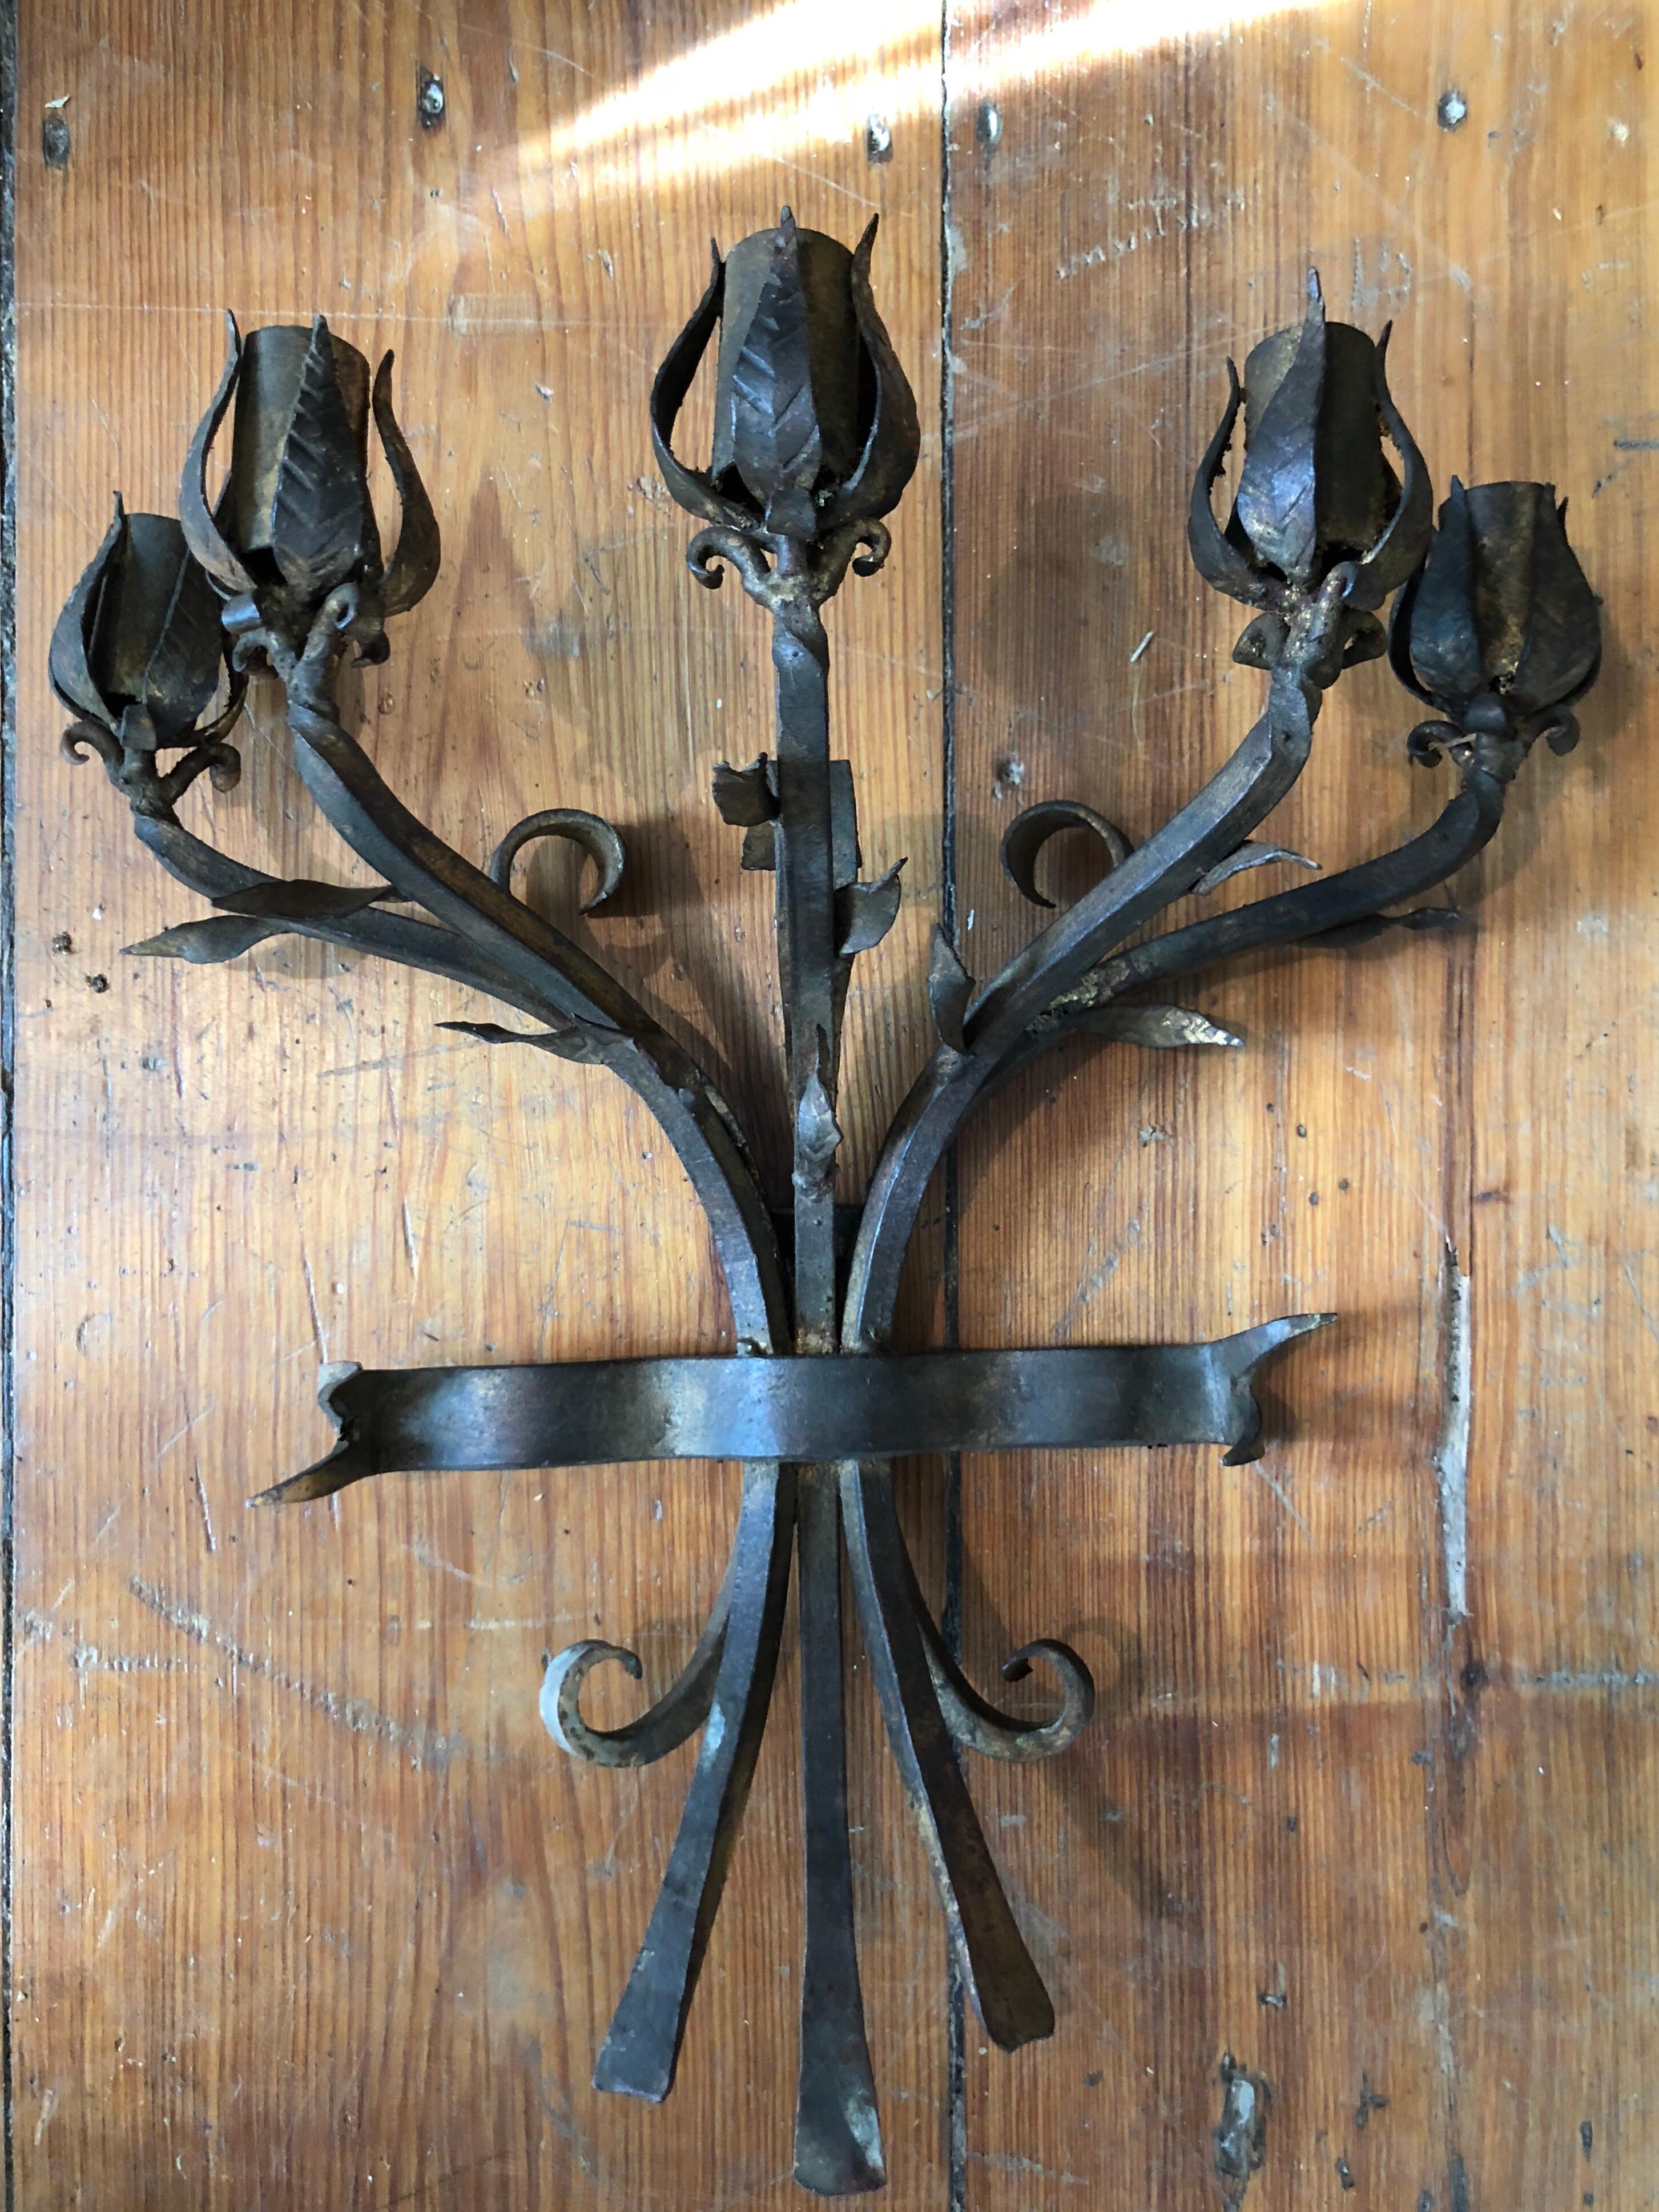 Heavy hand wrought iron wall candelabra. Intricate detailed craftsmanship of five roses in a bouquet shape. One of a kind artisan piece. Heavy and substantial. Holds 5 candles. This item can parcel ship domestically for $49
   